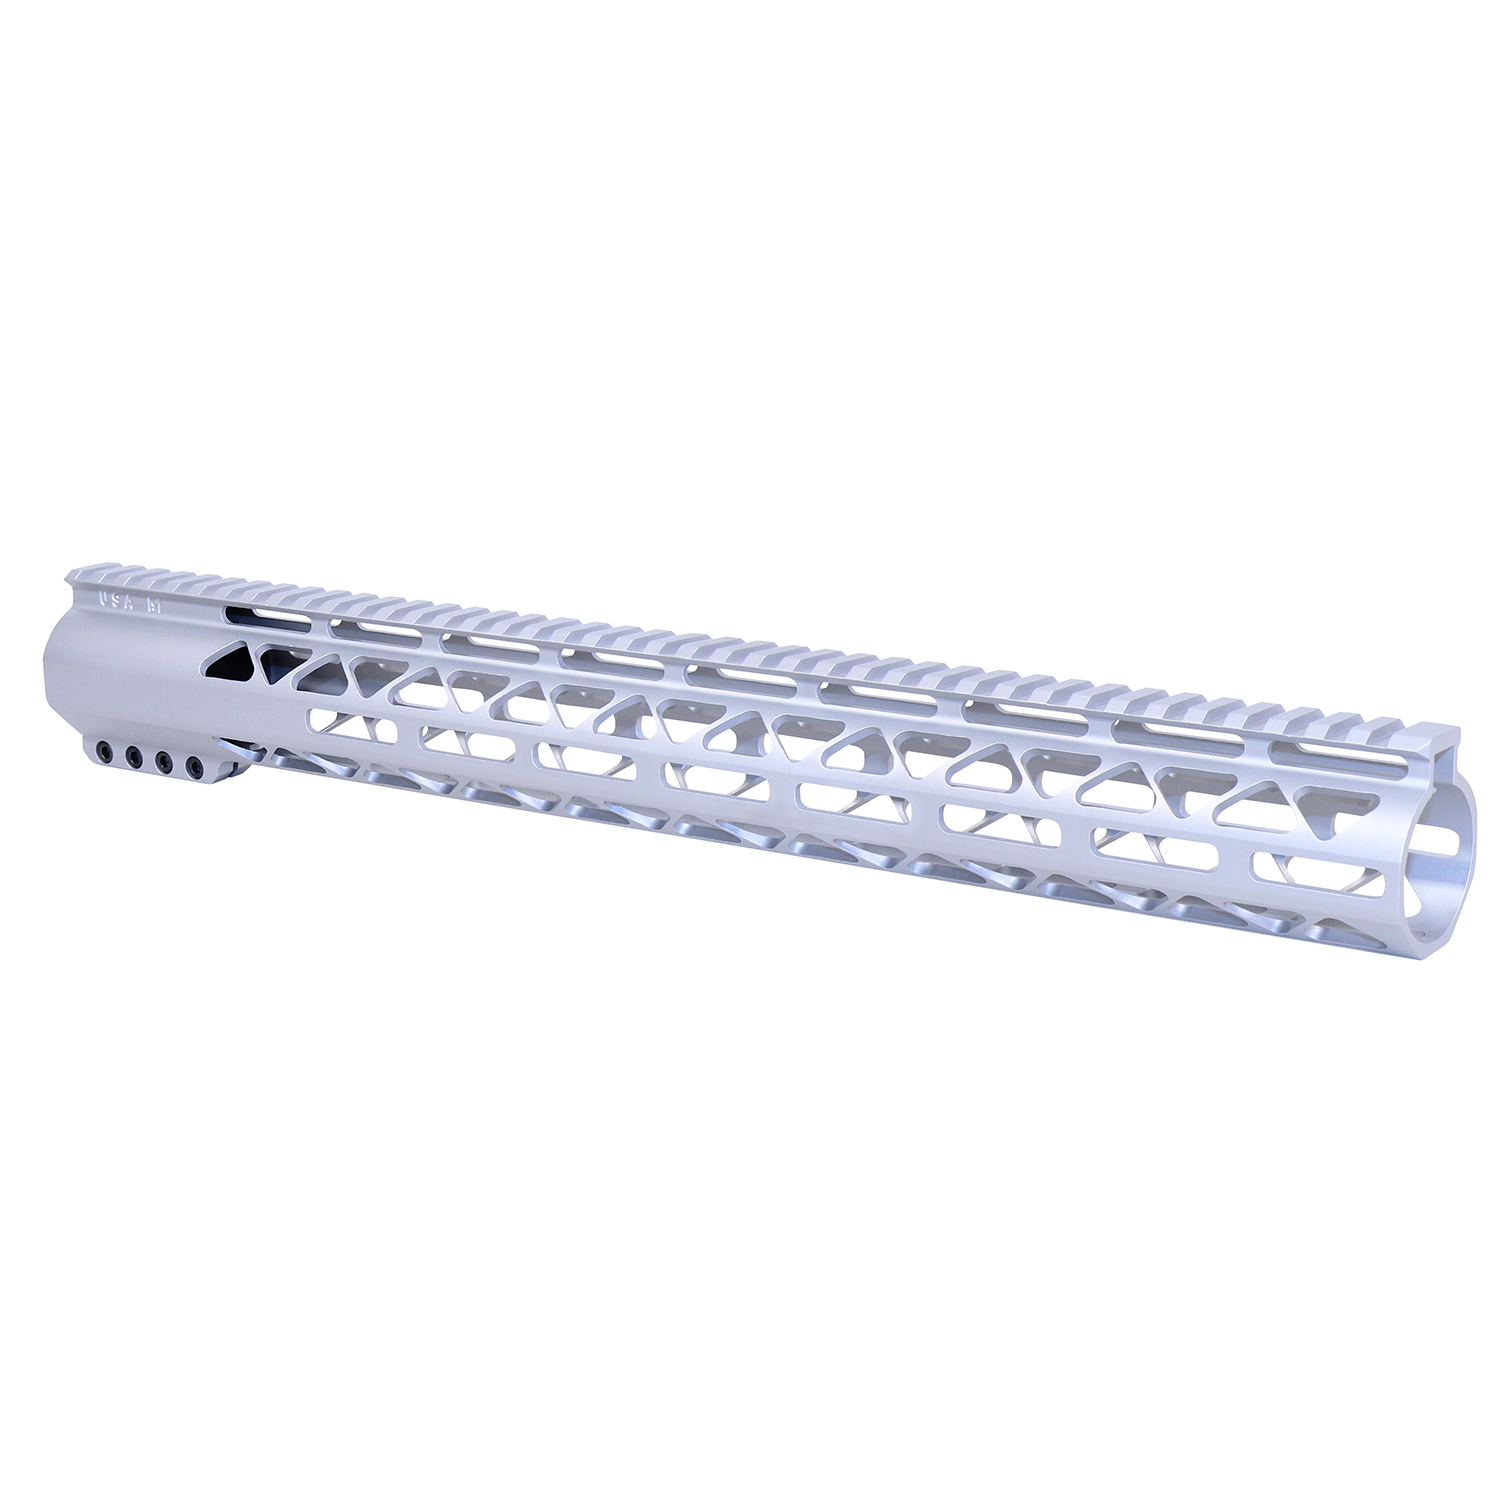 16.5" AIR-LOK Series M-LOK Compression Free Floating Handguard With Monolithic Top Rail (.308 Cal) (Anodized Clear)